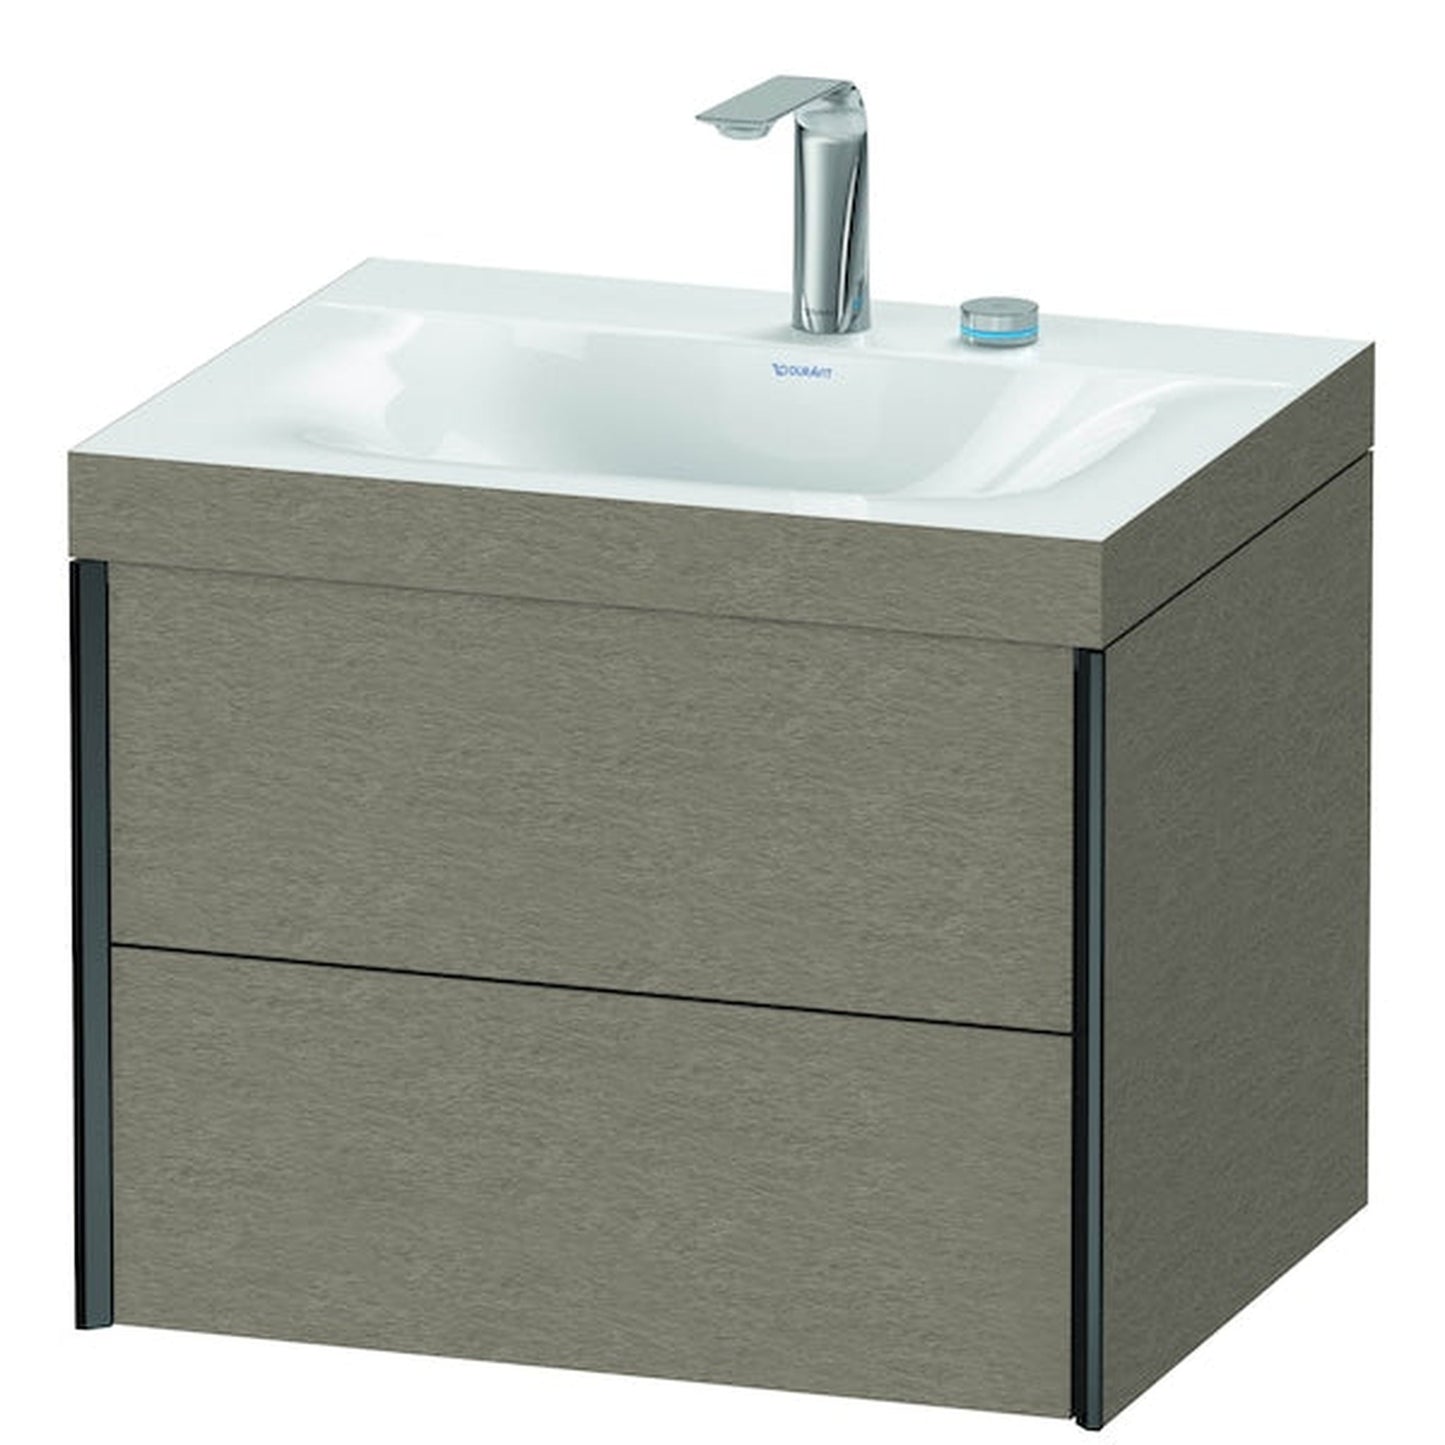 Duravit Xviu 24" x 20" x 19" Two Drawer C-Bonded Wall-Mount Vanity Kit With Two Tap Holes, Cashmere Oak (XV4614EB211C)